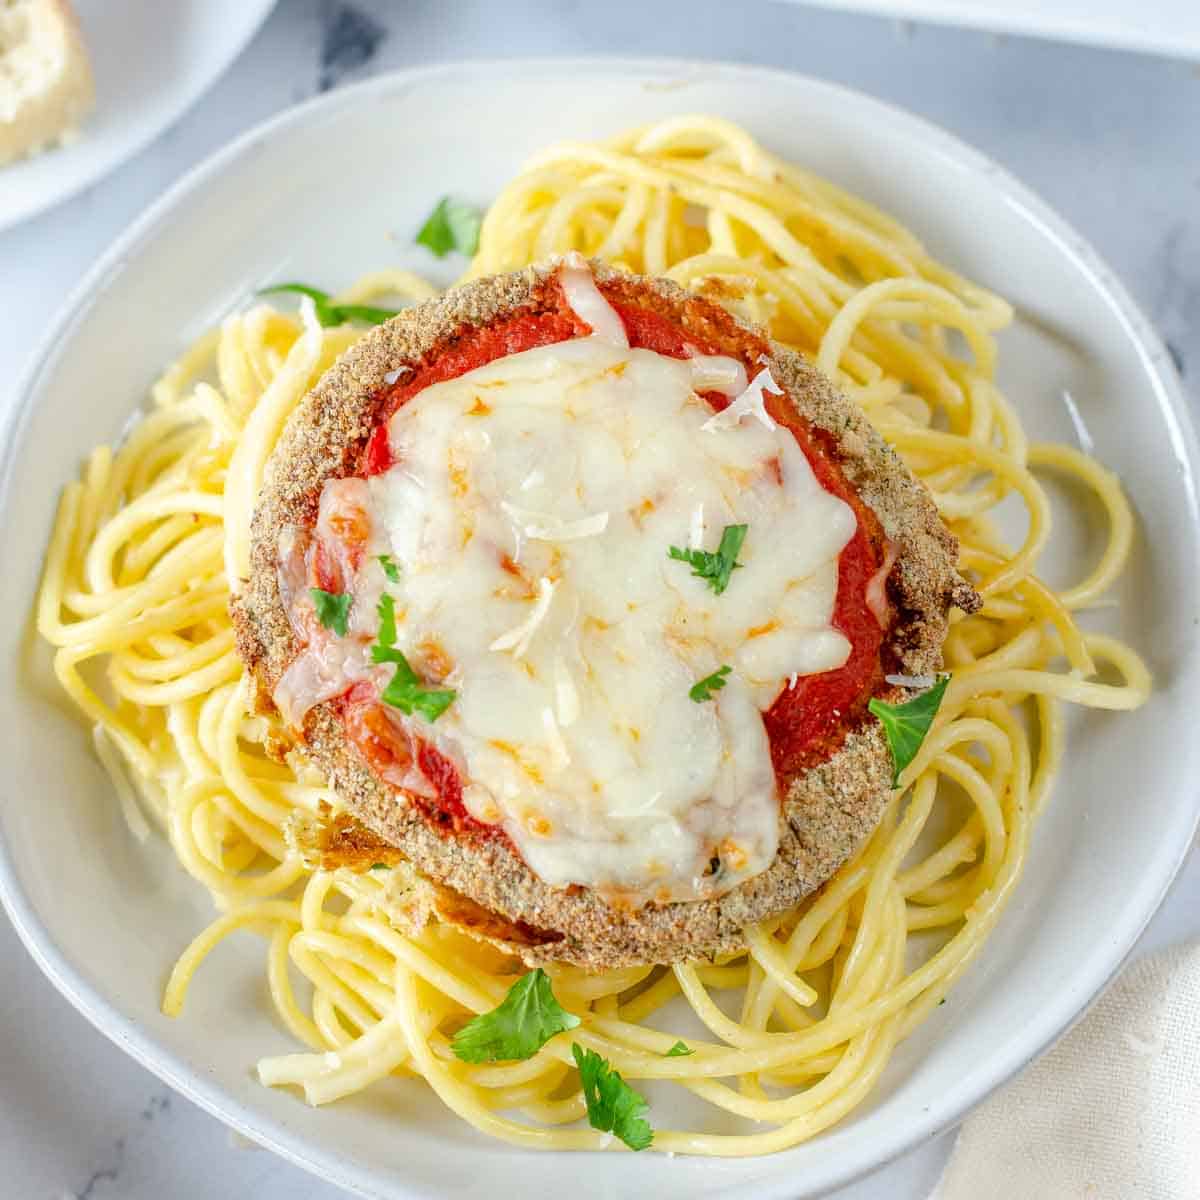 Beautifully air fried eggplant parmesan round over a bed of spaghetti topped with chopped parsley.